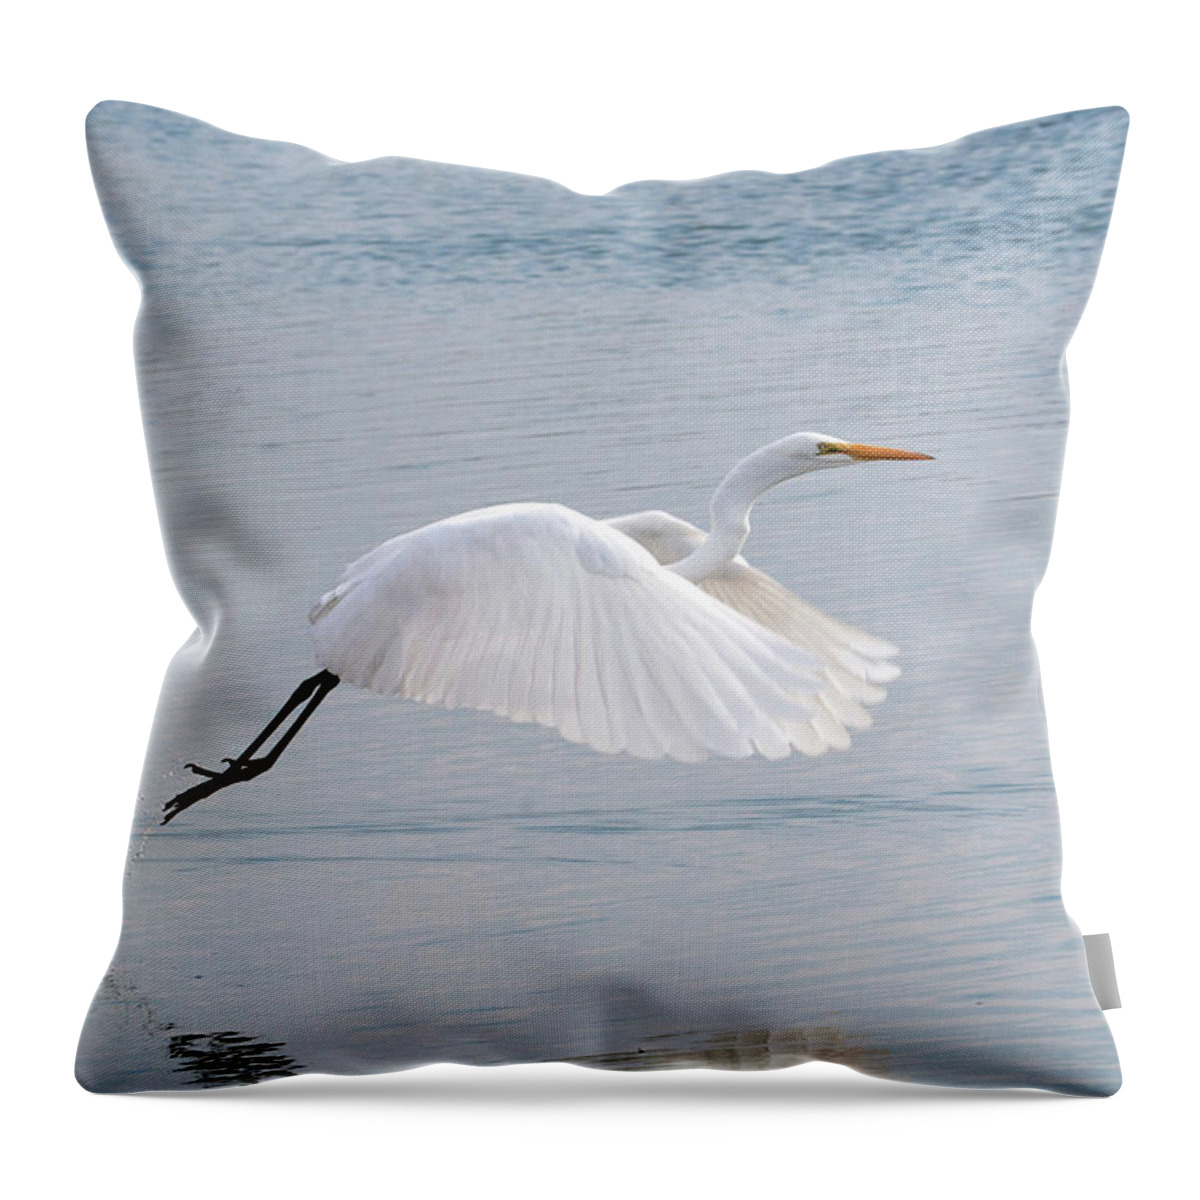 Egret Throw Pillow featuring the photograph Egret Taking Off 1 by Catherine Lau